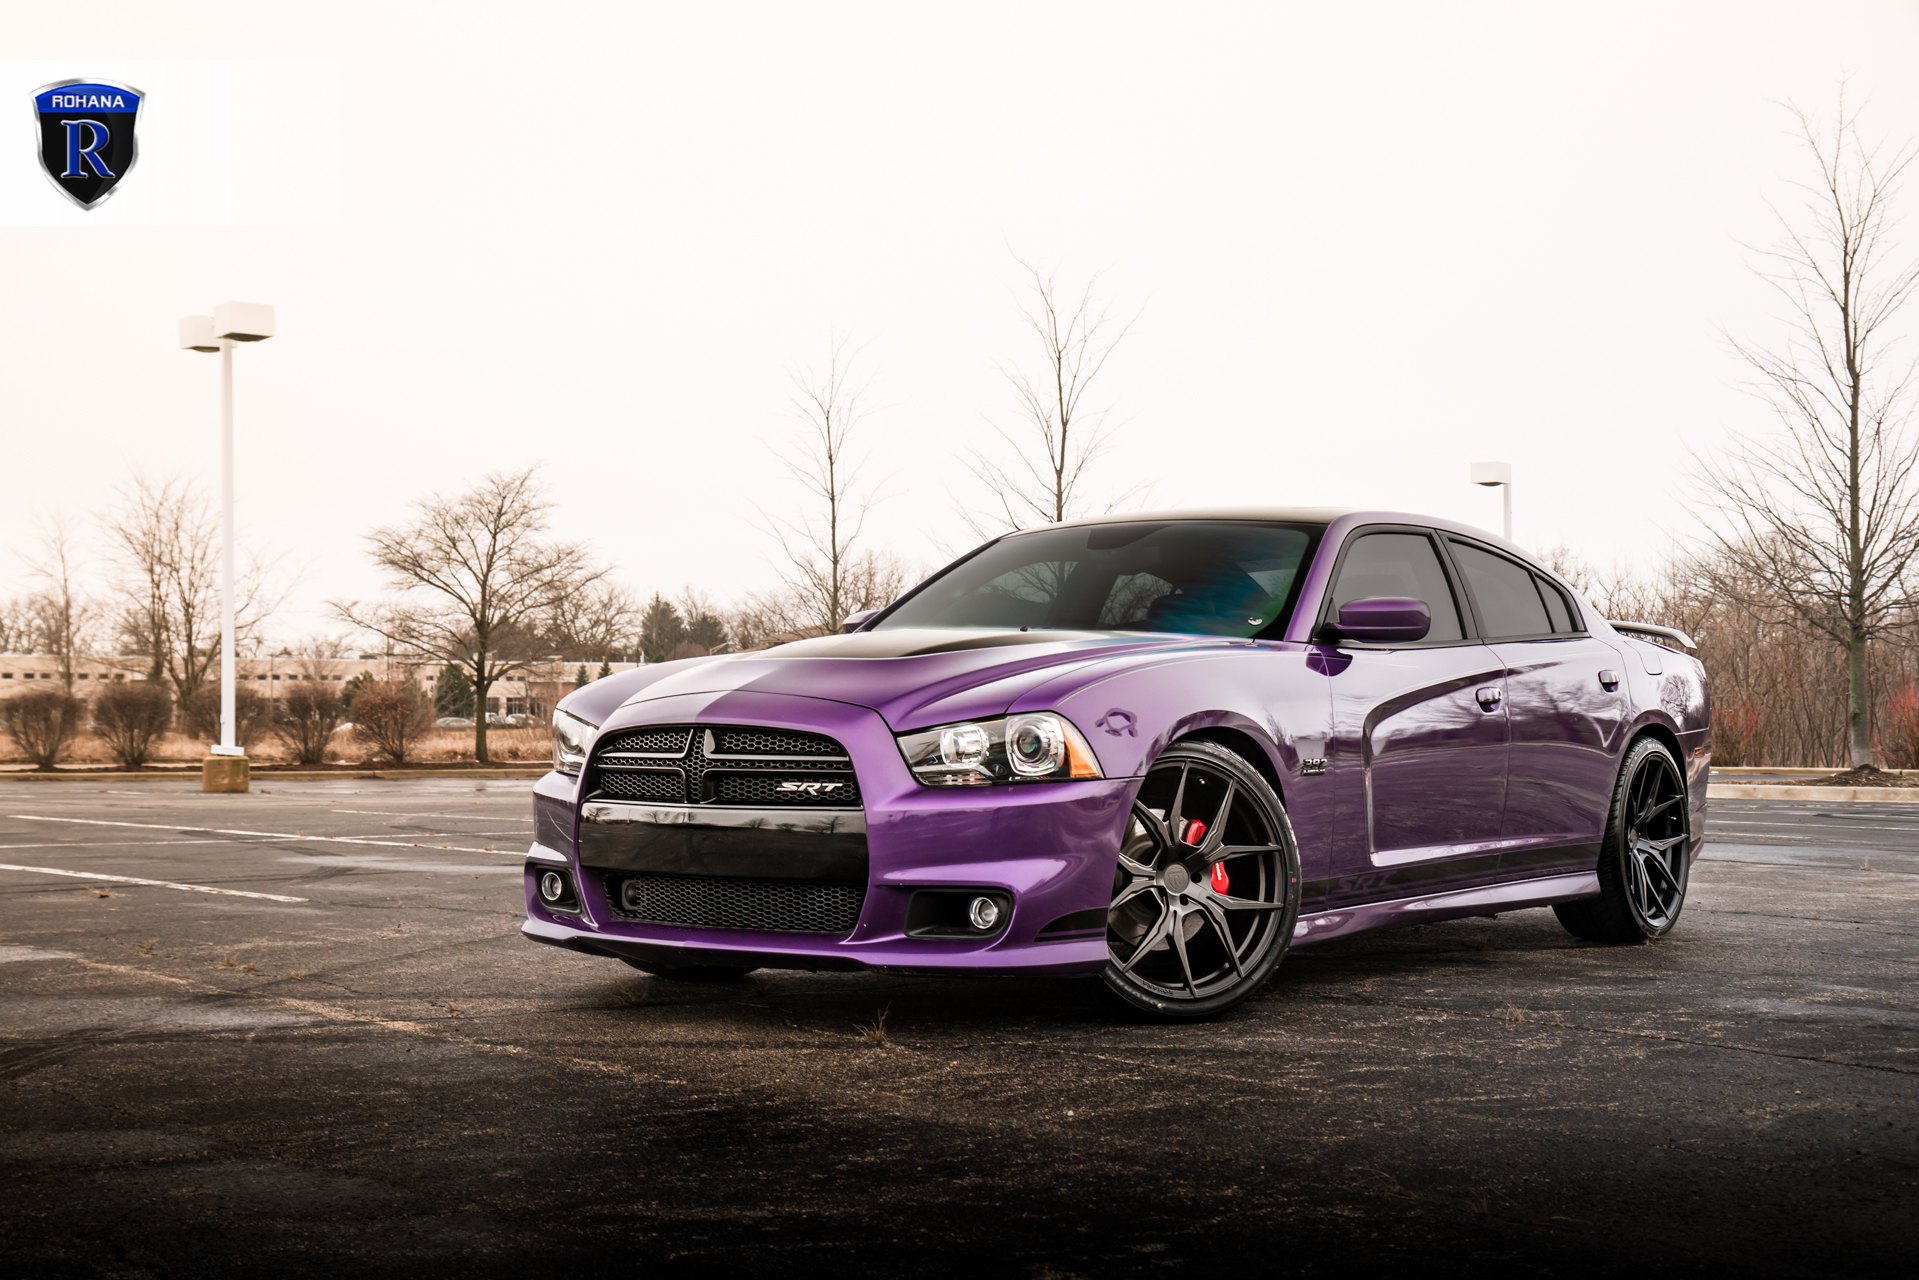 Front Bumper with Fog Lights on Purple Dodge Charger - Photo by Rohana Wheels